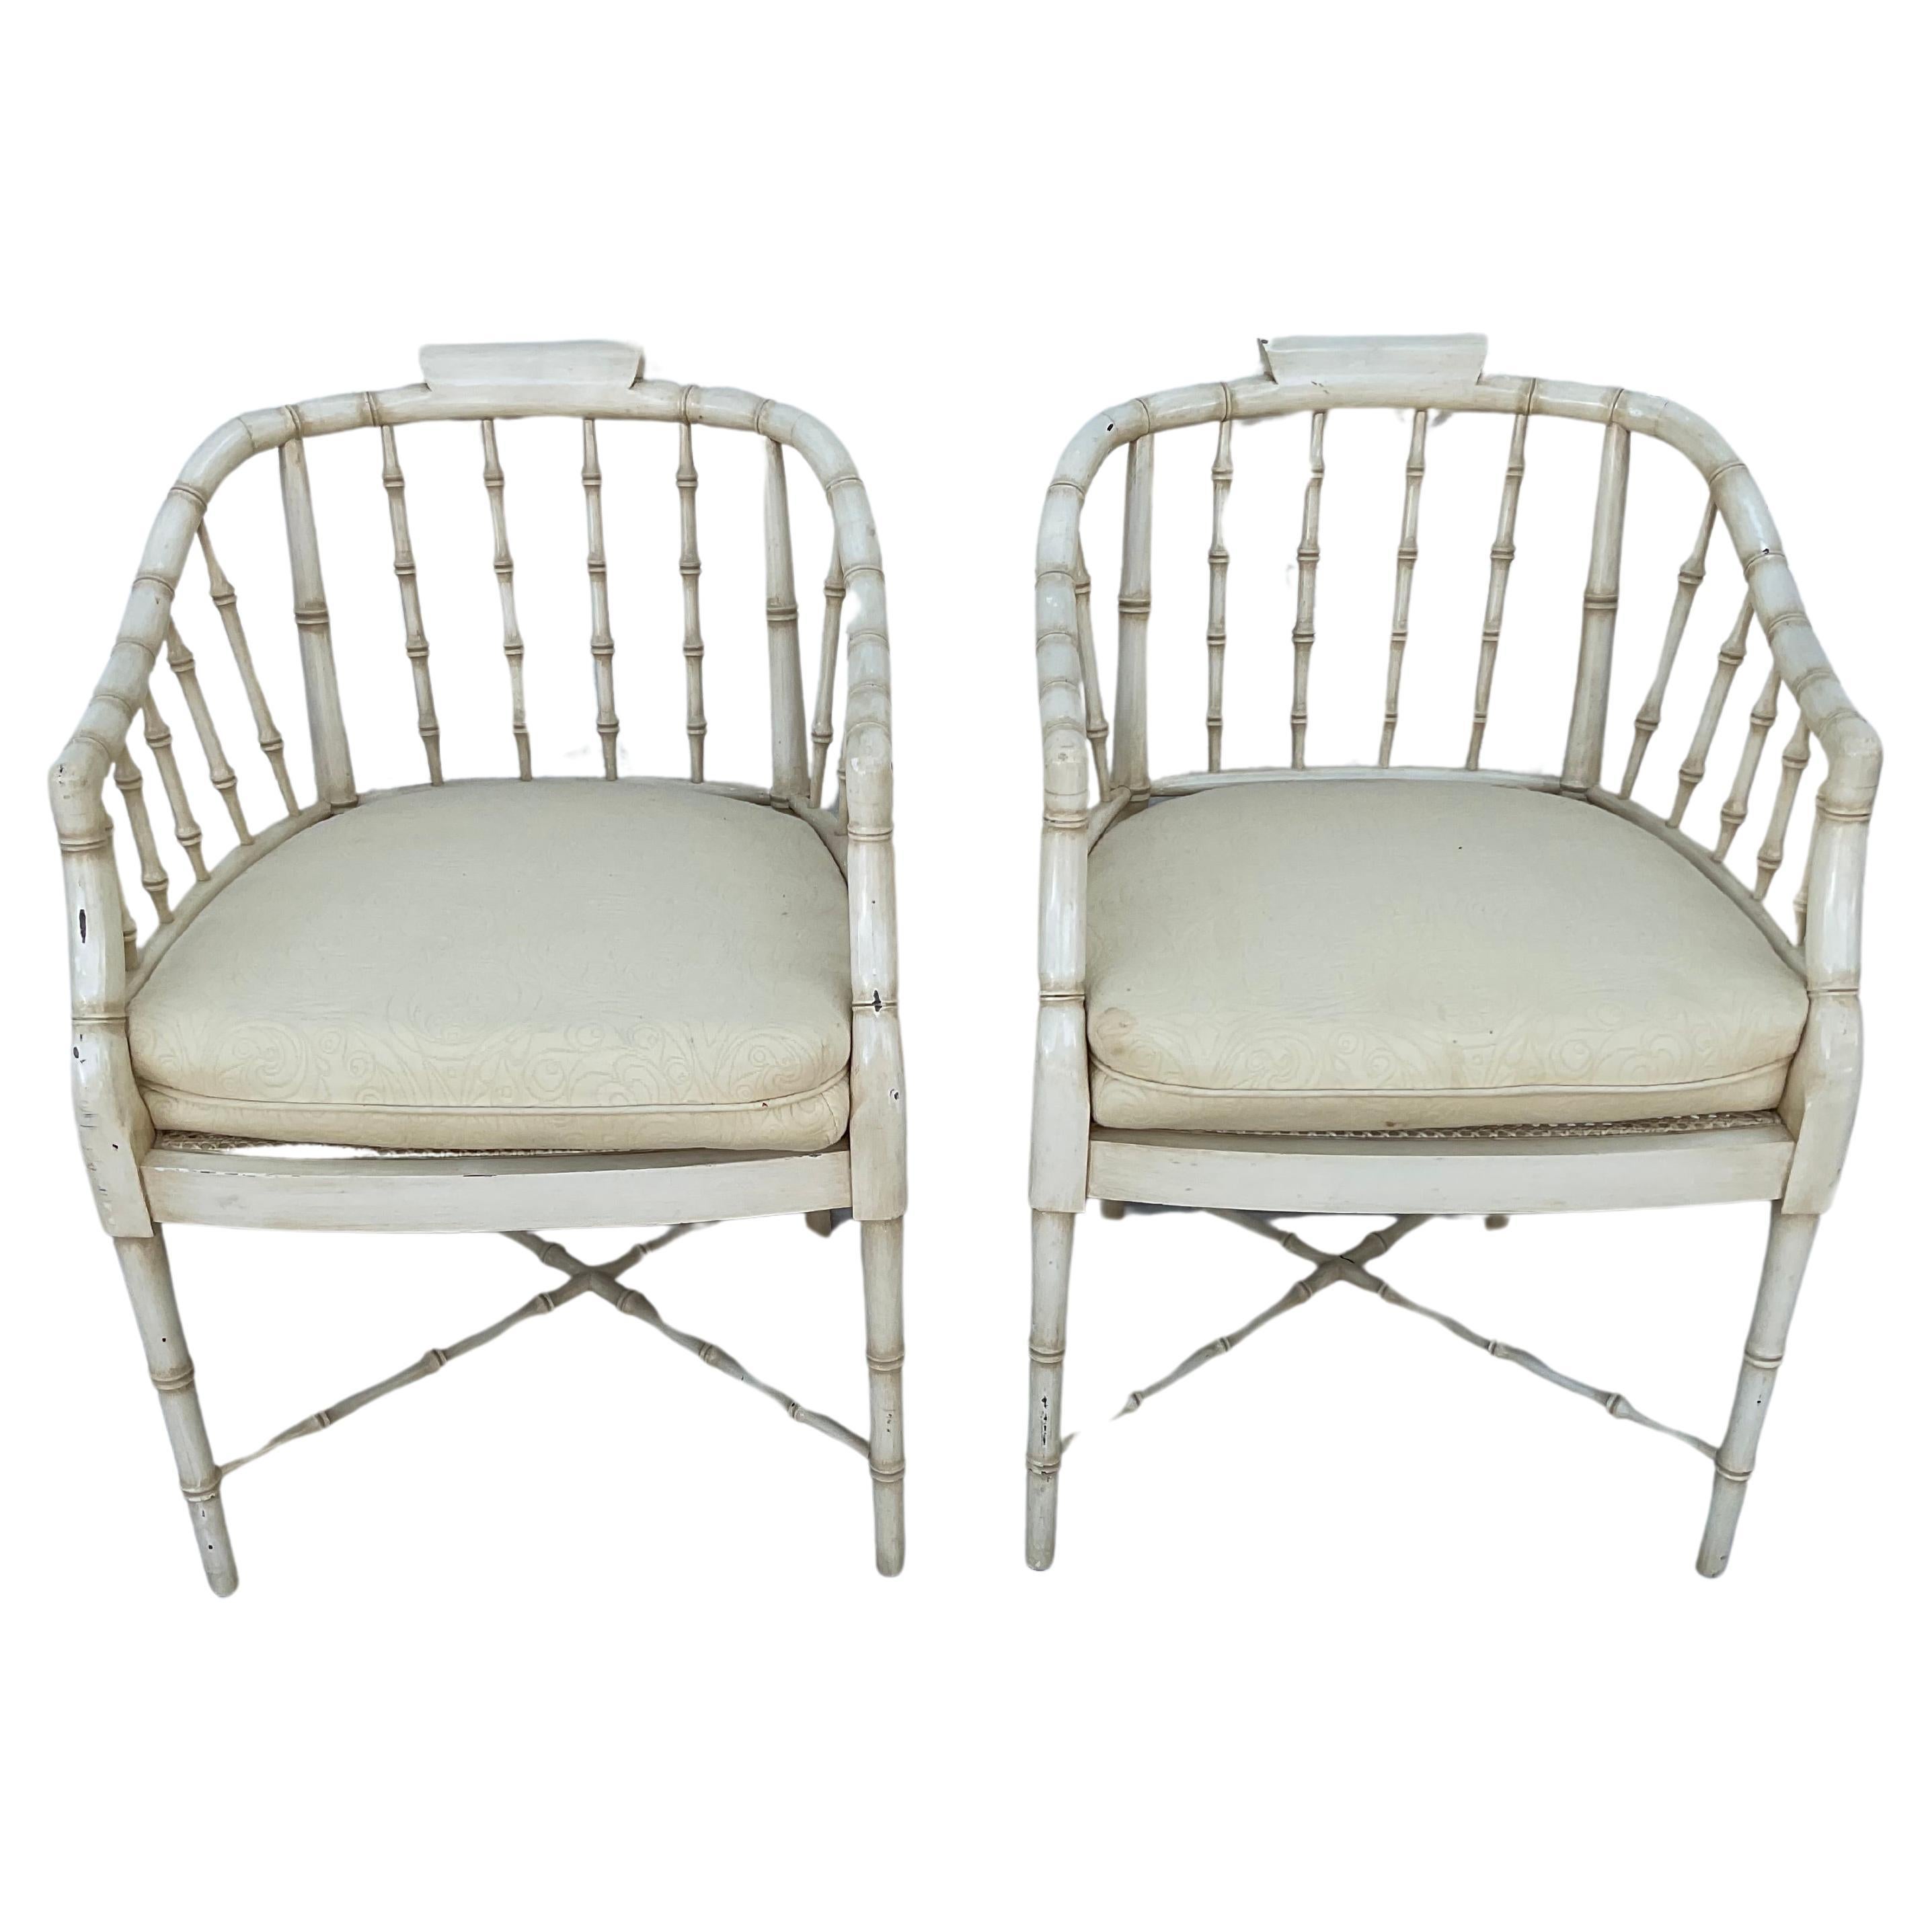 Fine pair of Regency style faux bamboo armchairs, painted a cream color. Features tub-shaped backs and cane seats.  Chairs are raised on four slender legs connected by an X-shaped stretcher. They come with removable cream cushions.